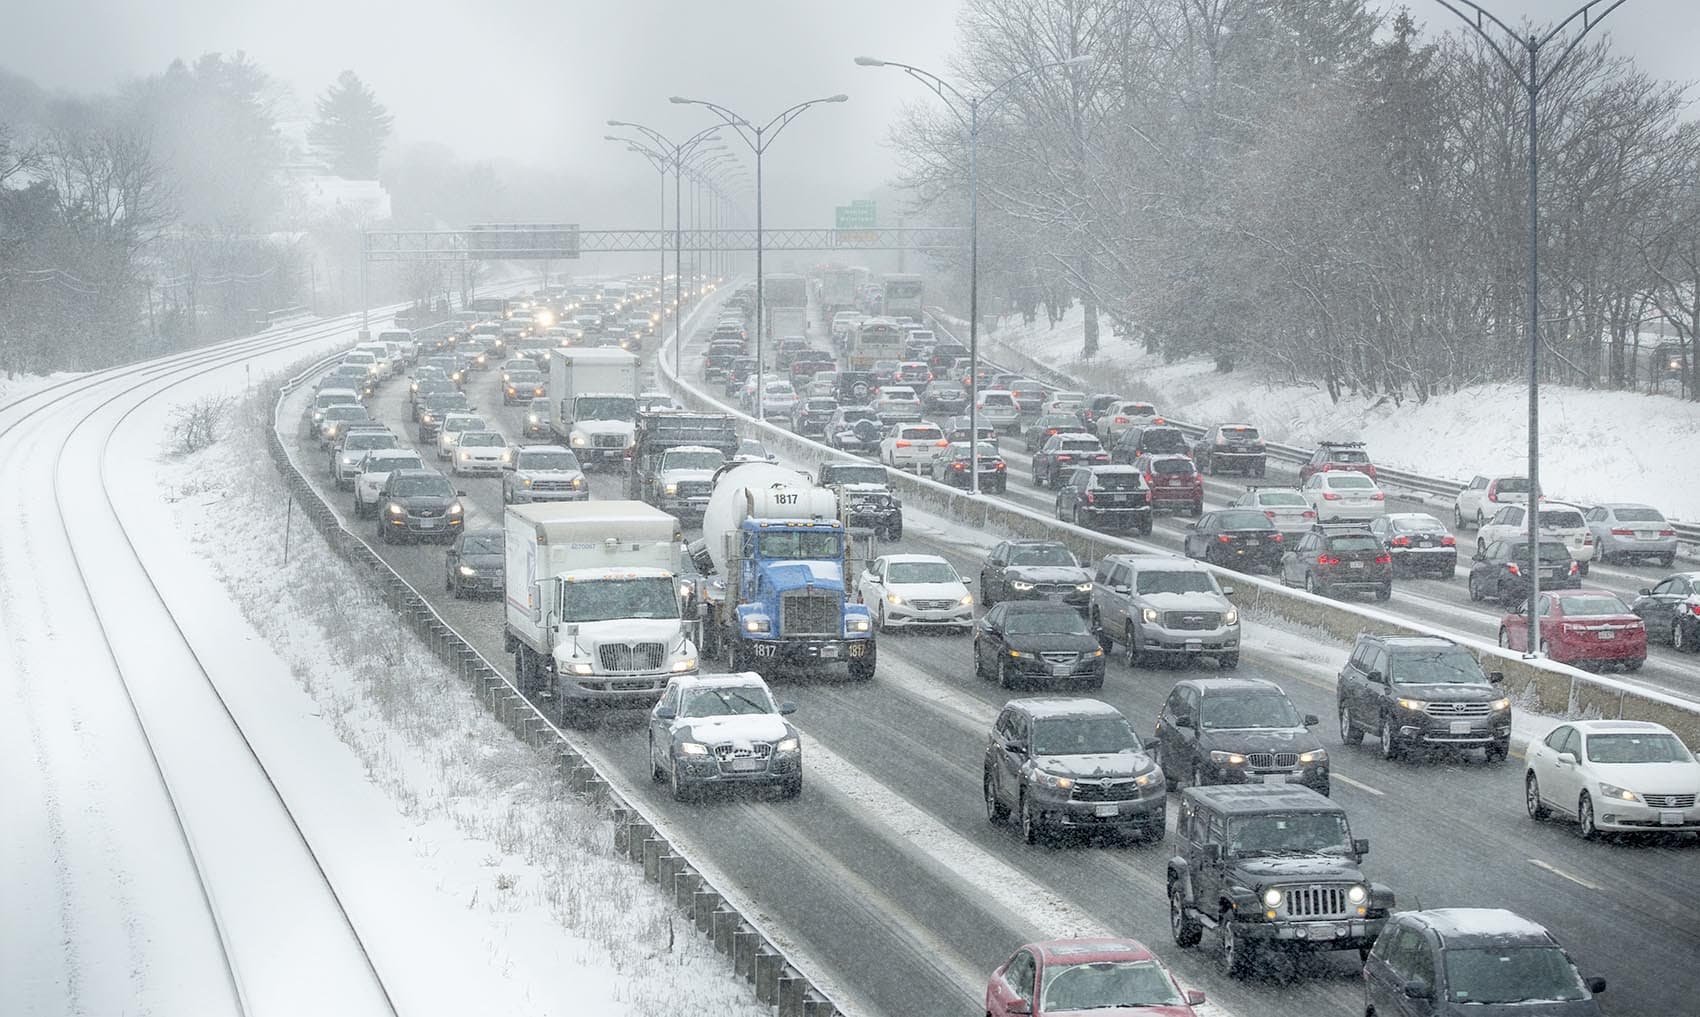 Snow slows the traffic on the Mass. Pike during the morning commute on Jan. 30. (Robin Lubbock/WBUR)